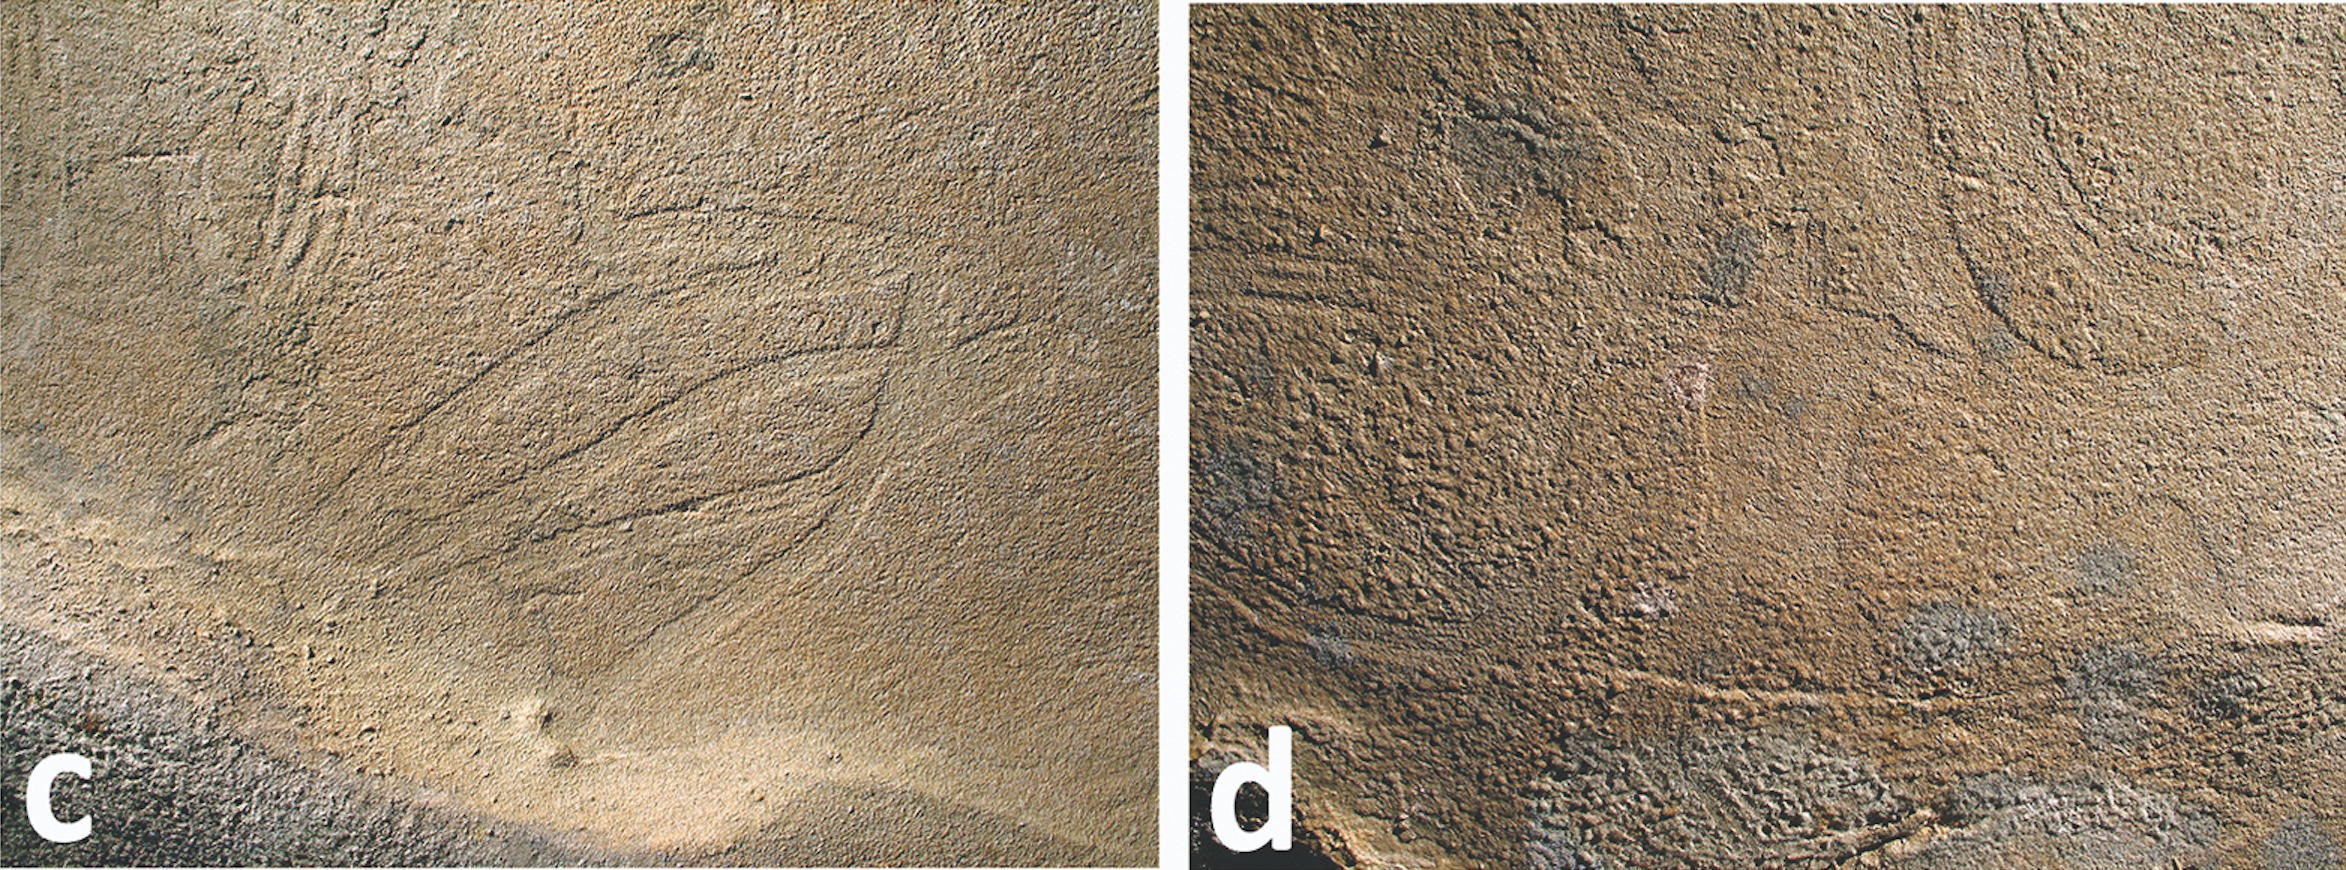 Small glyphs of a bird (left) and an anthropomorphic figure (right) in the glyph chamber. (Photo: A. Cressler)